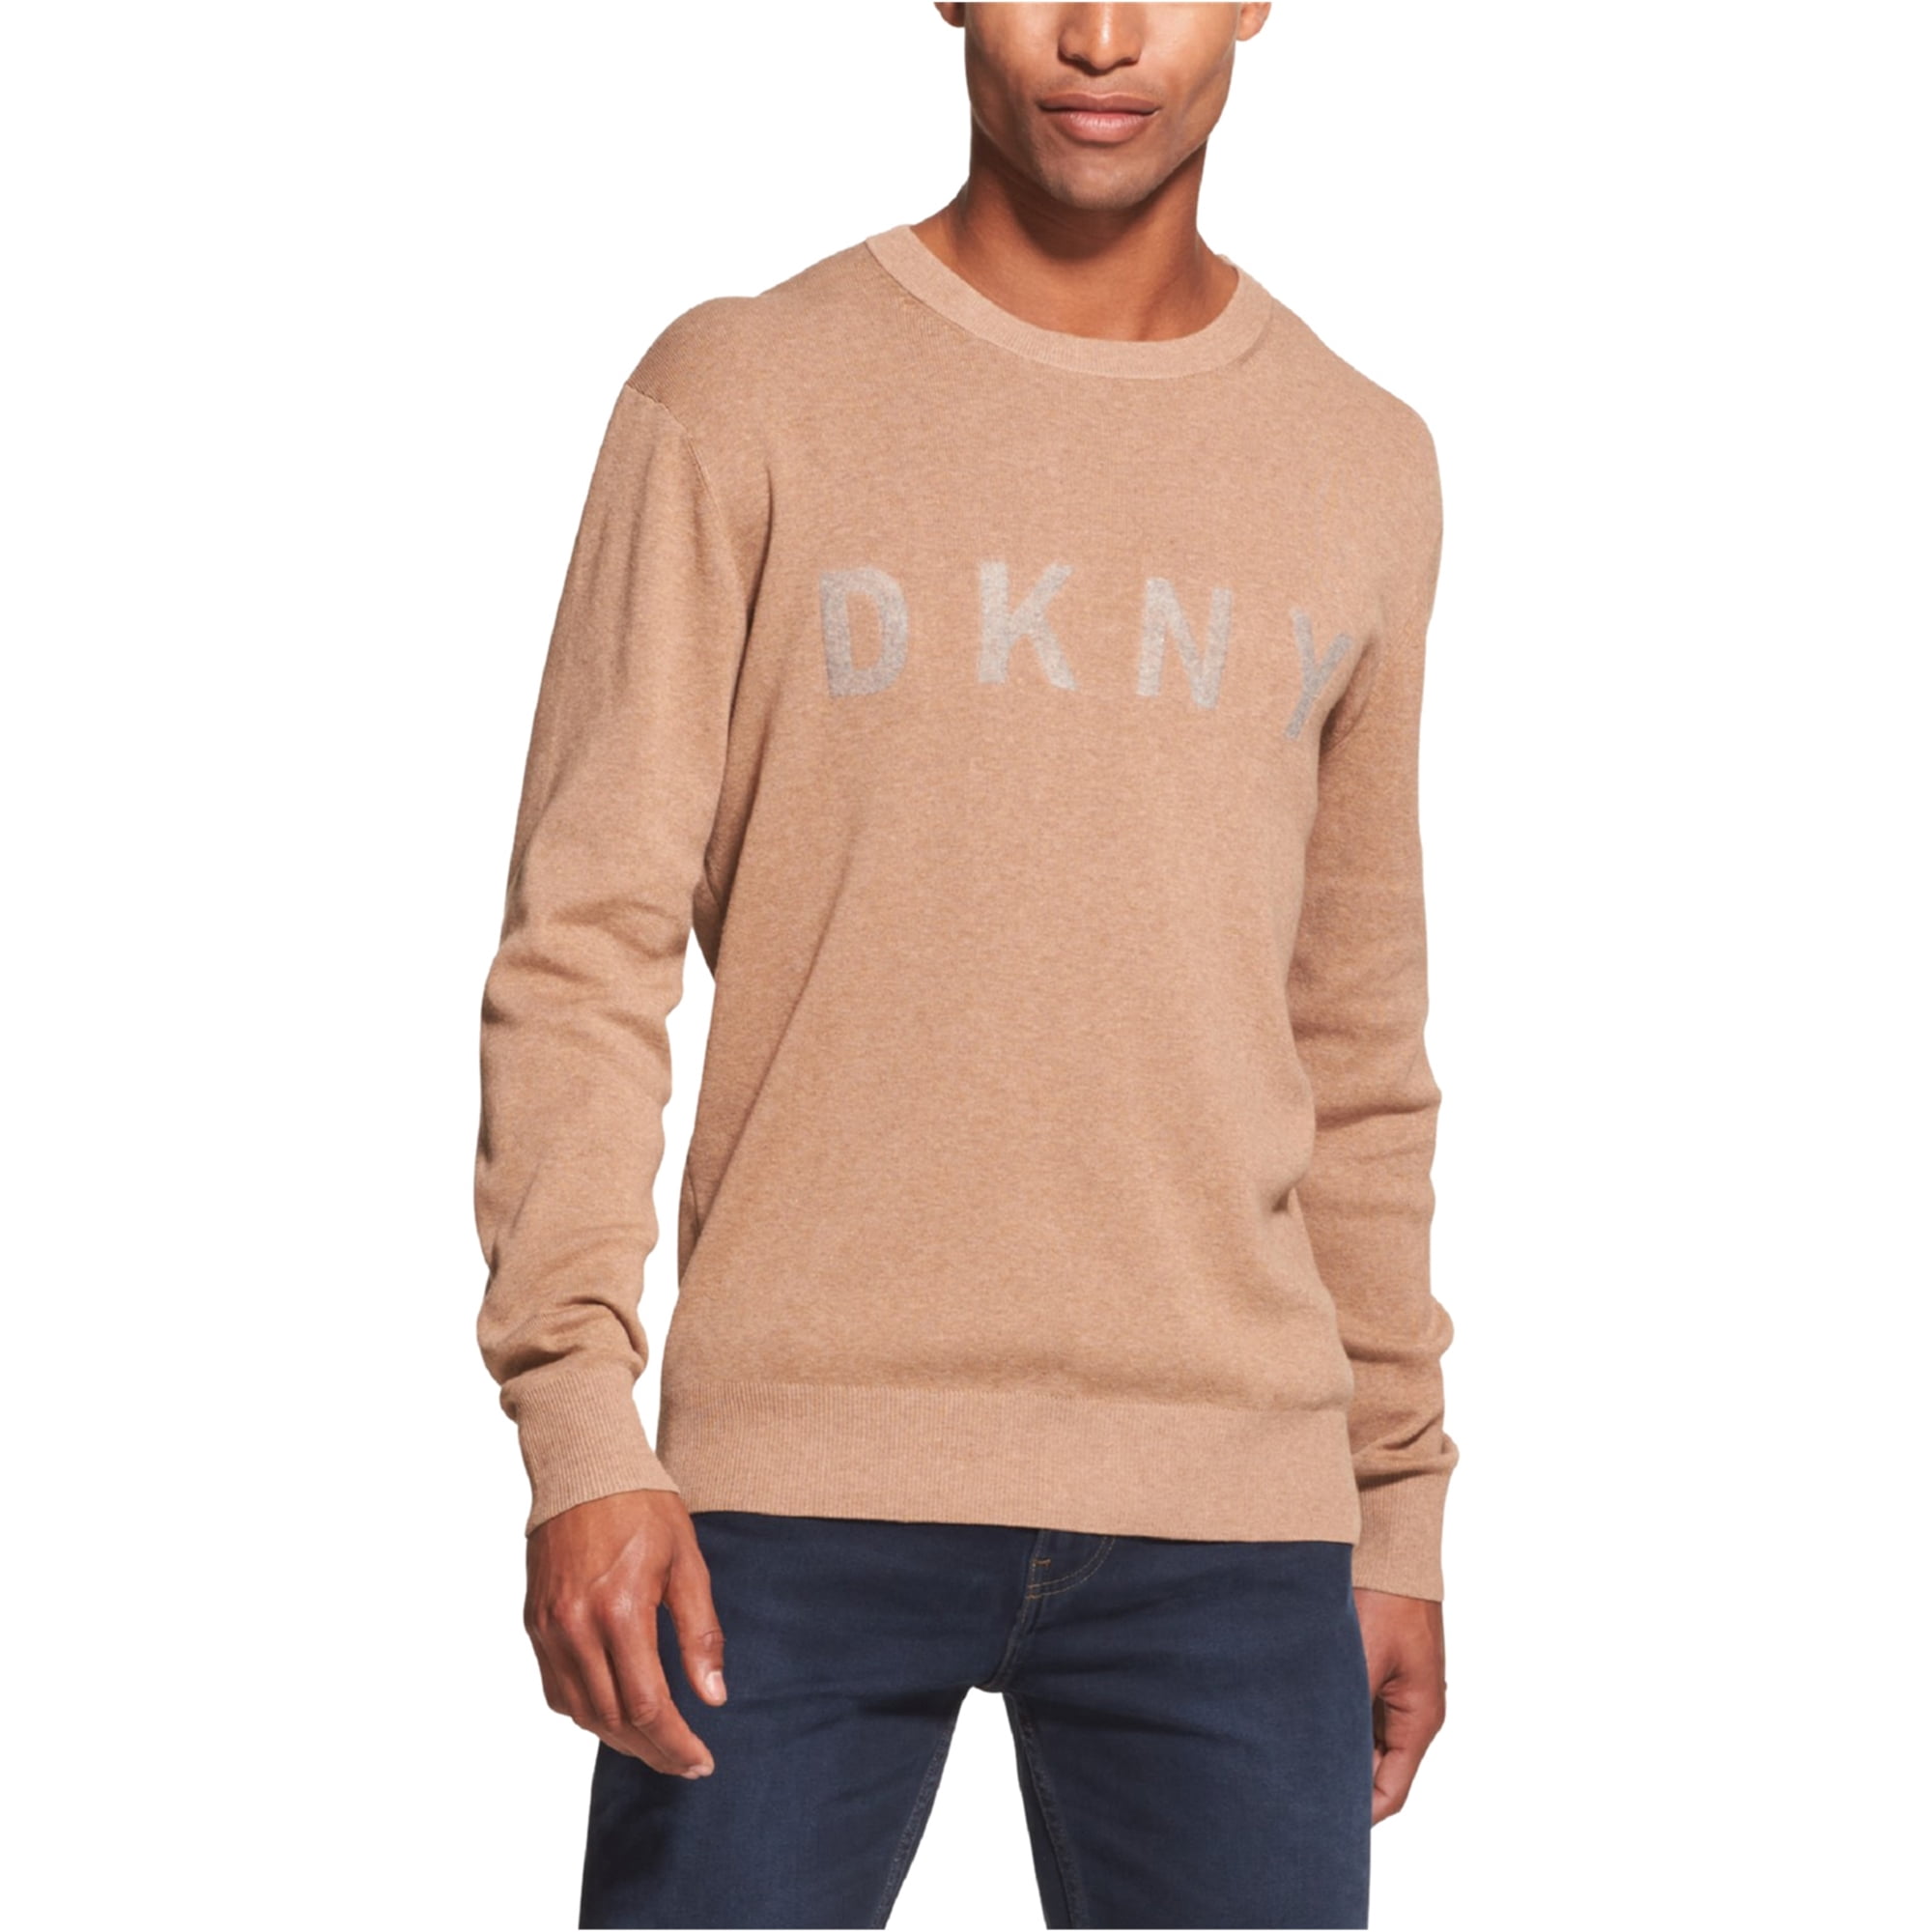 DKNY Mens Logo Crew-Neck Sweater, Brown, Large